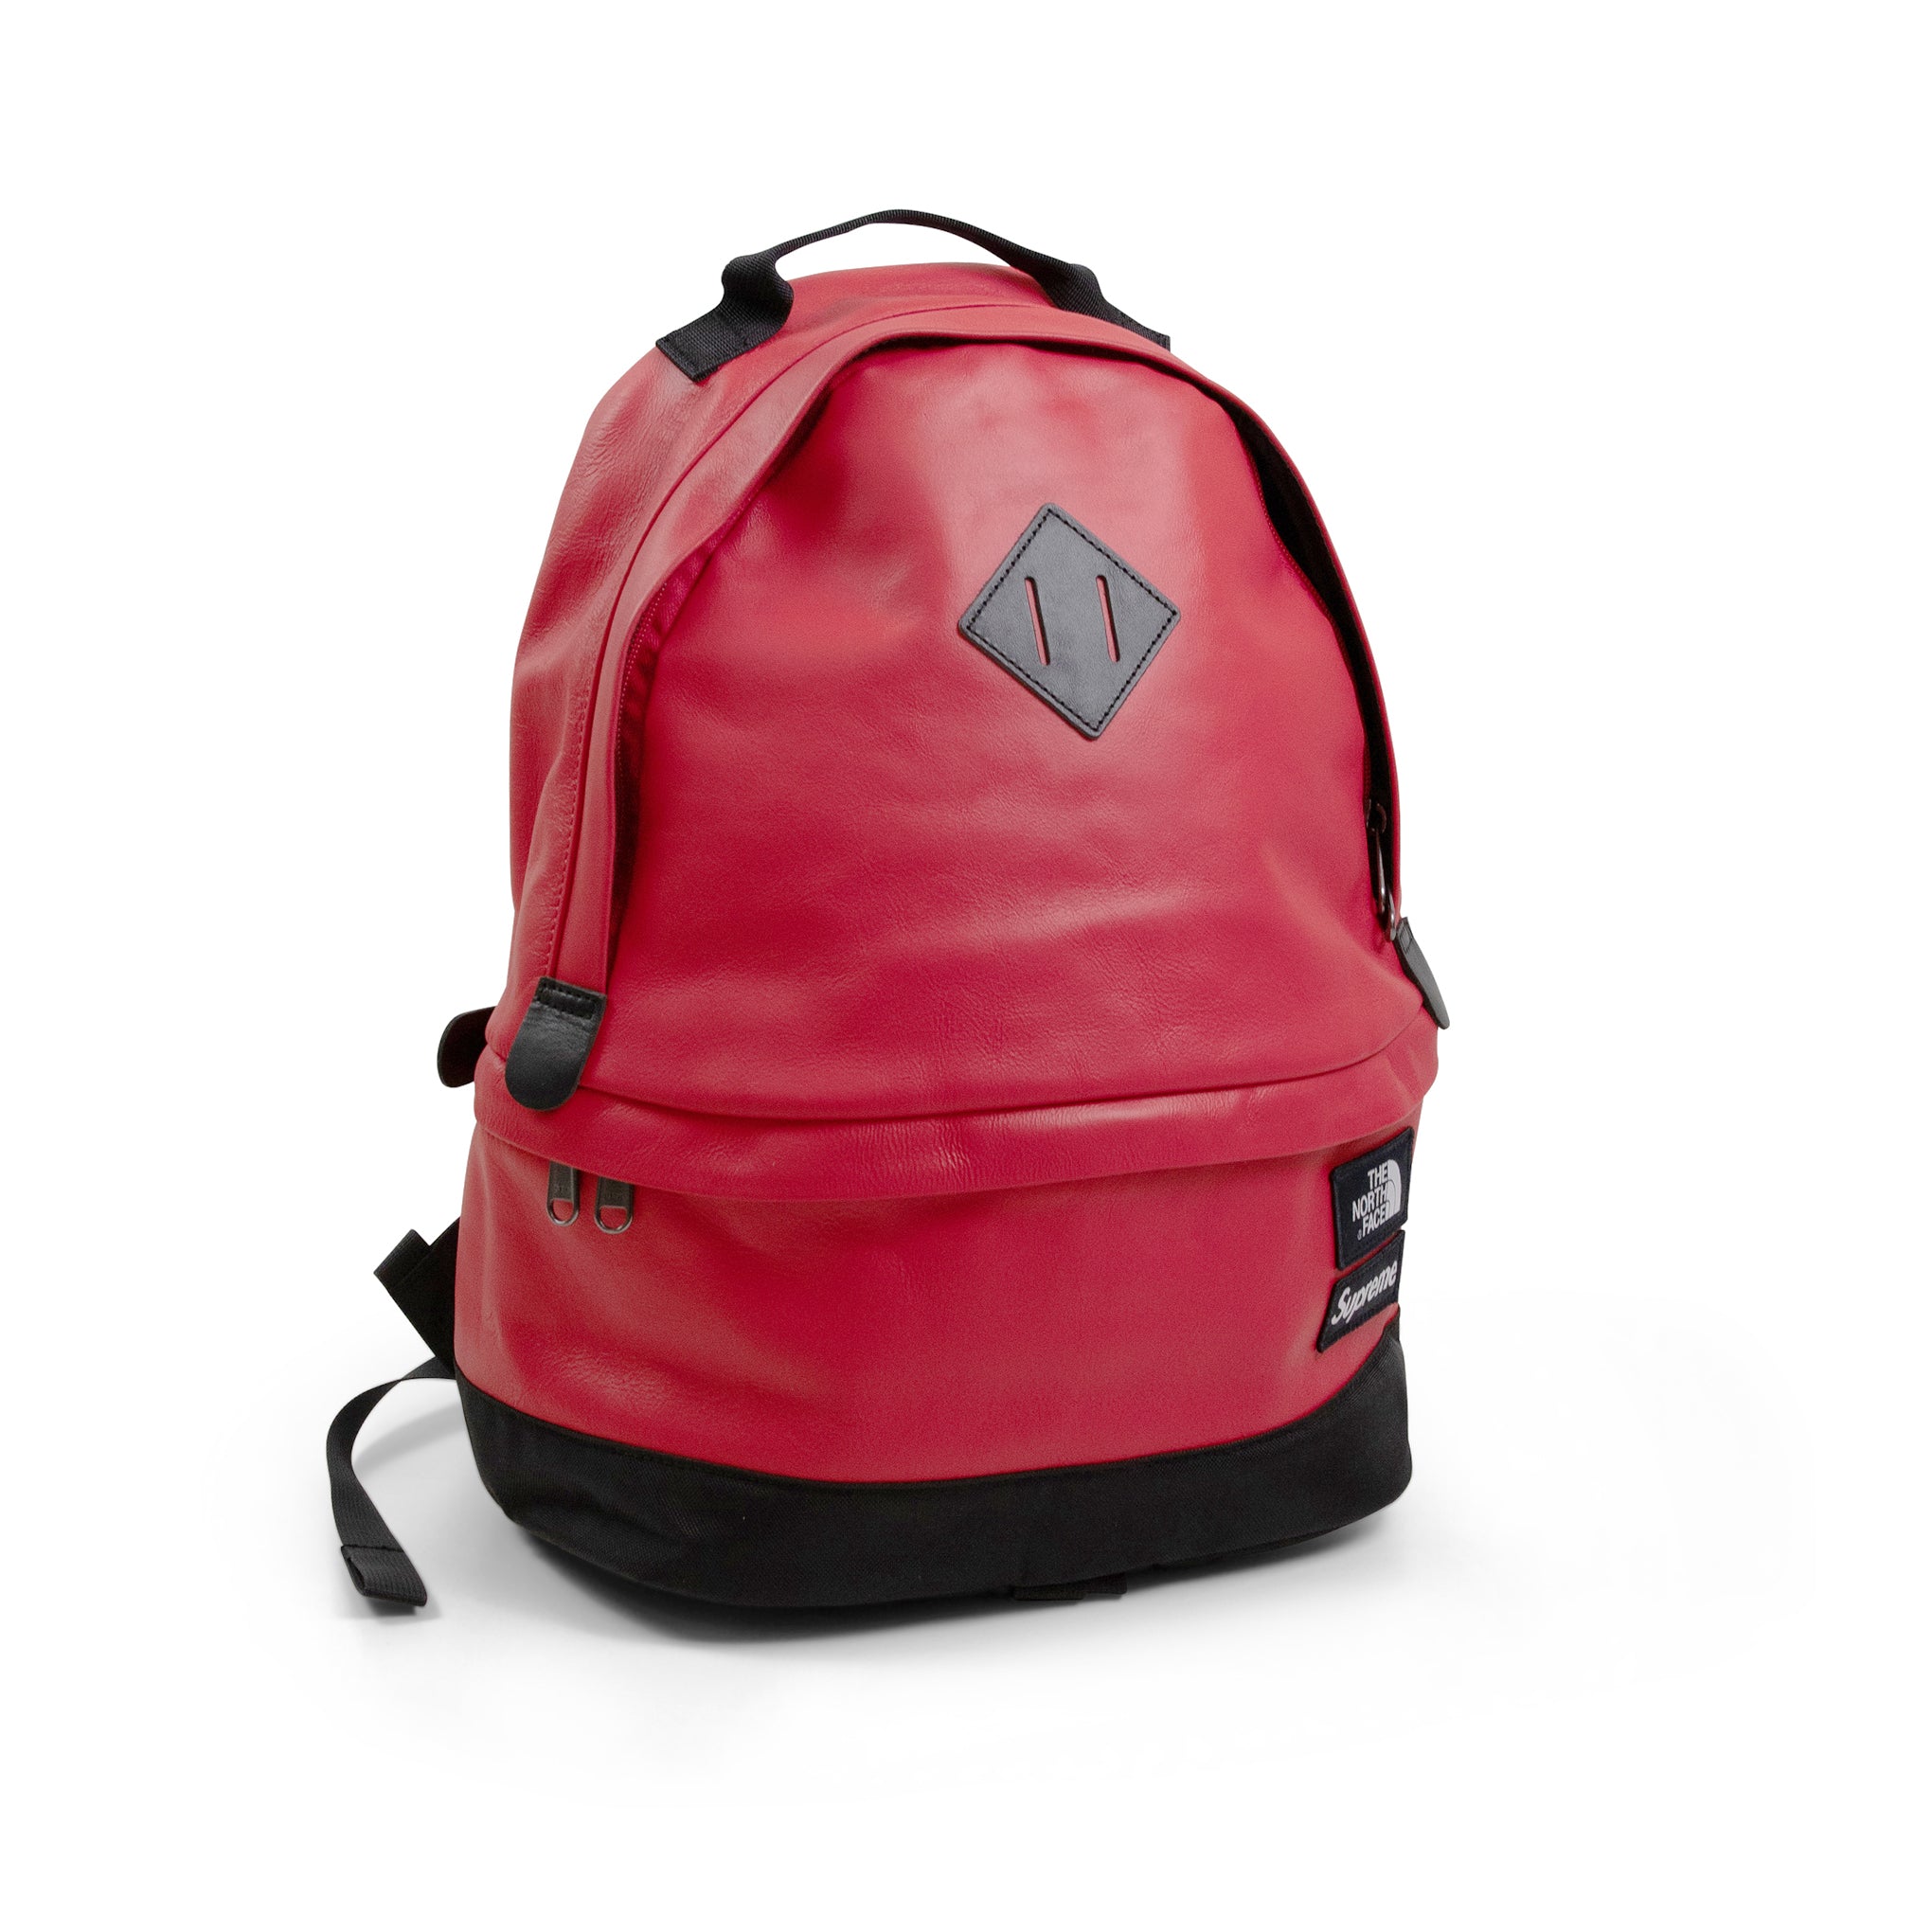 SUPREME THE NORTH FACE LEATHER DAY PACK – ODTO